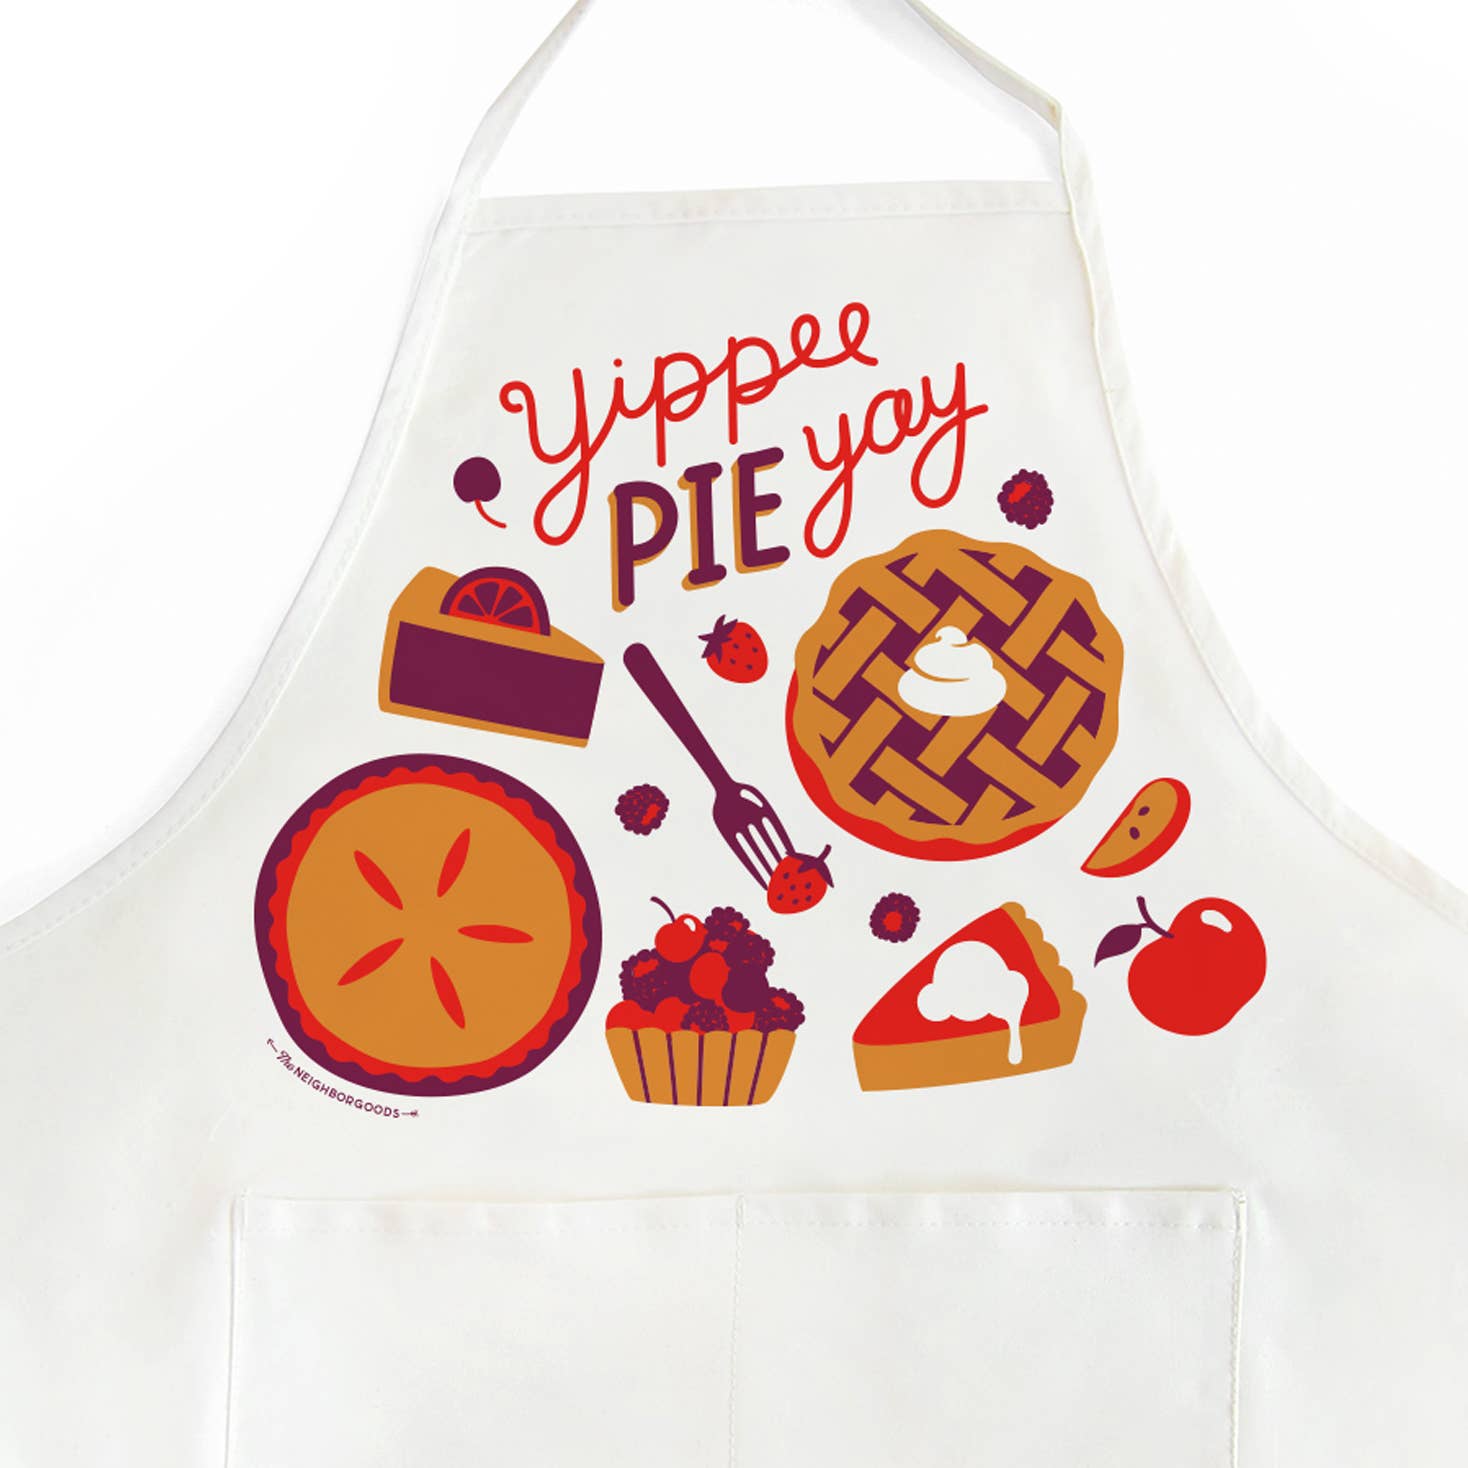 Yippee Pie Yay Apron - Gift & Gather